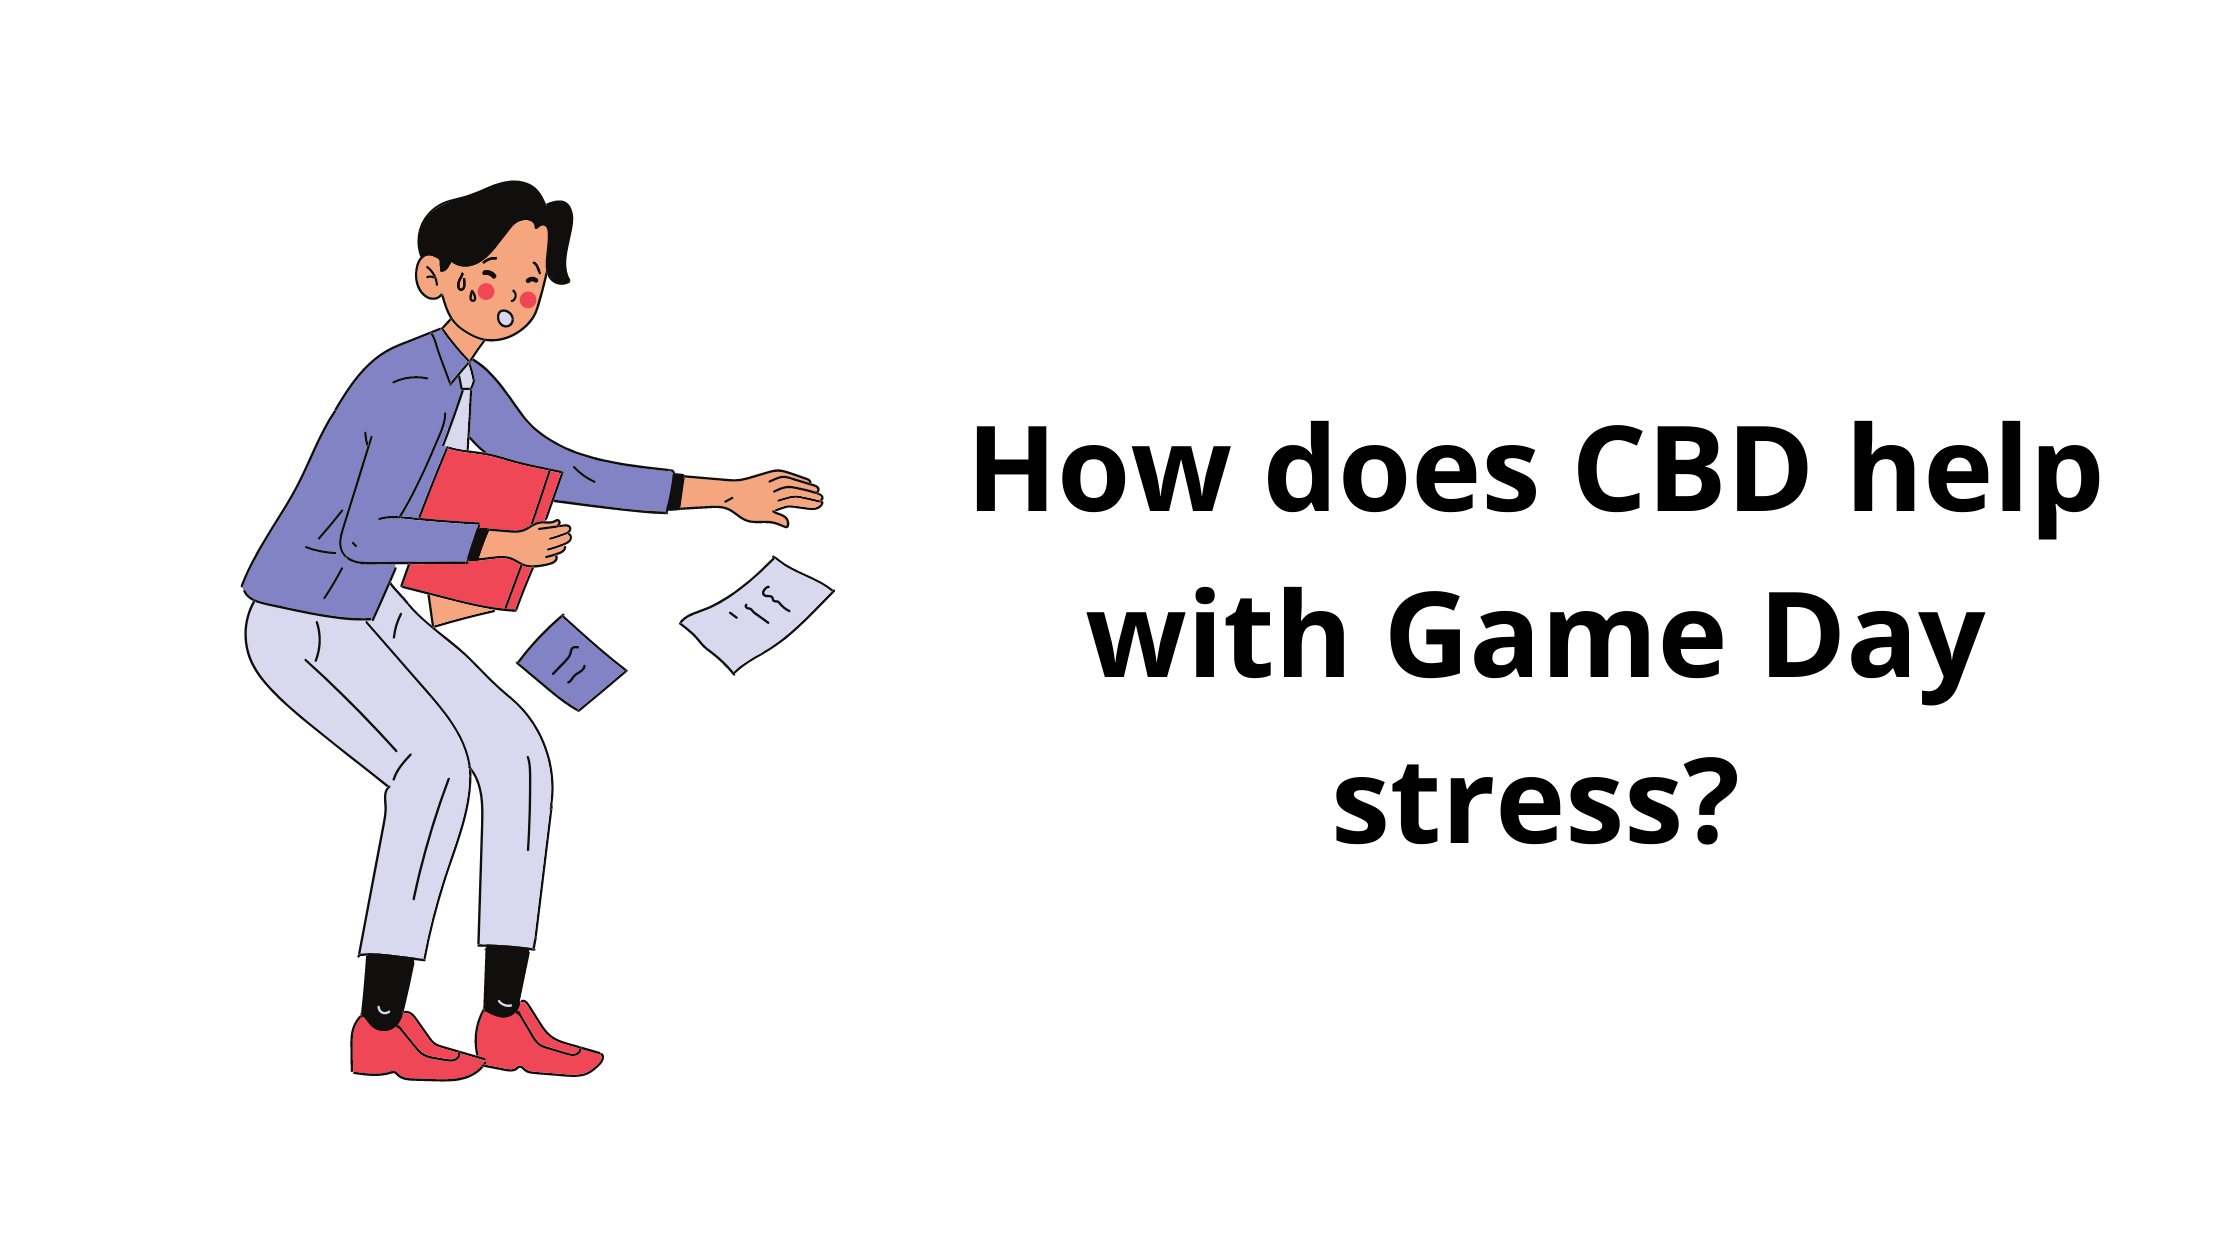 How does CBD help with Game Day stress?